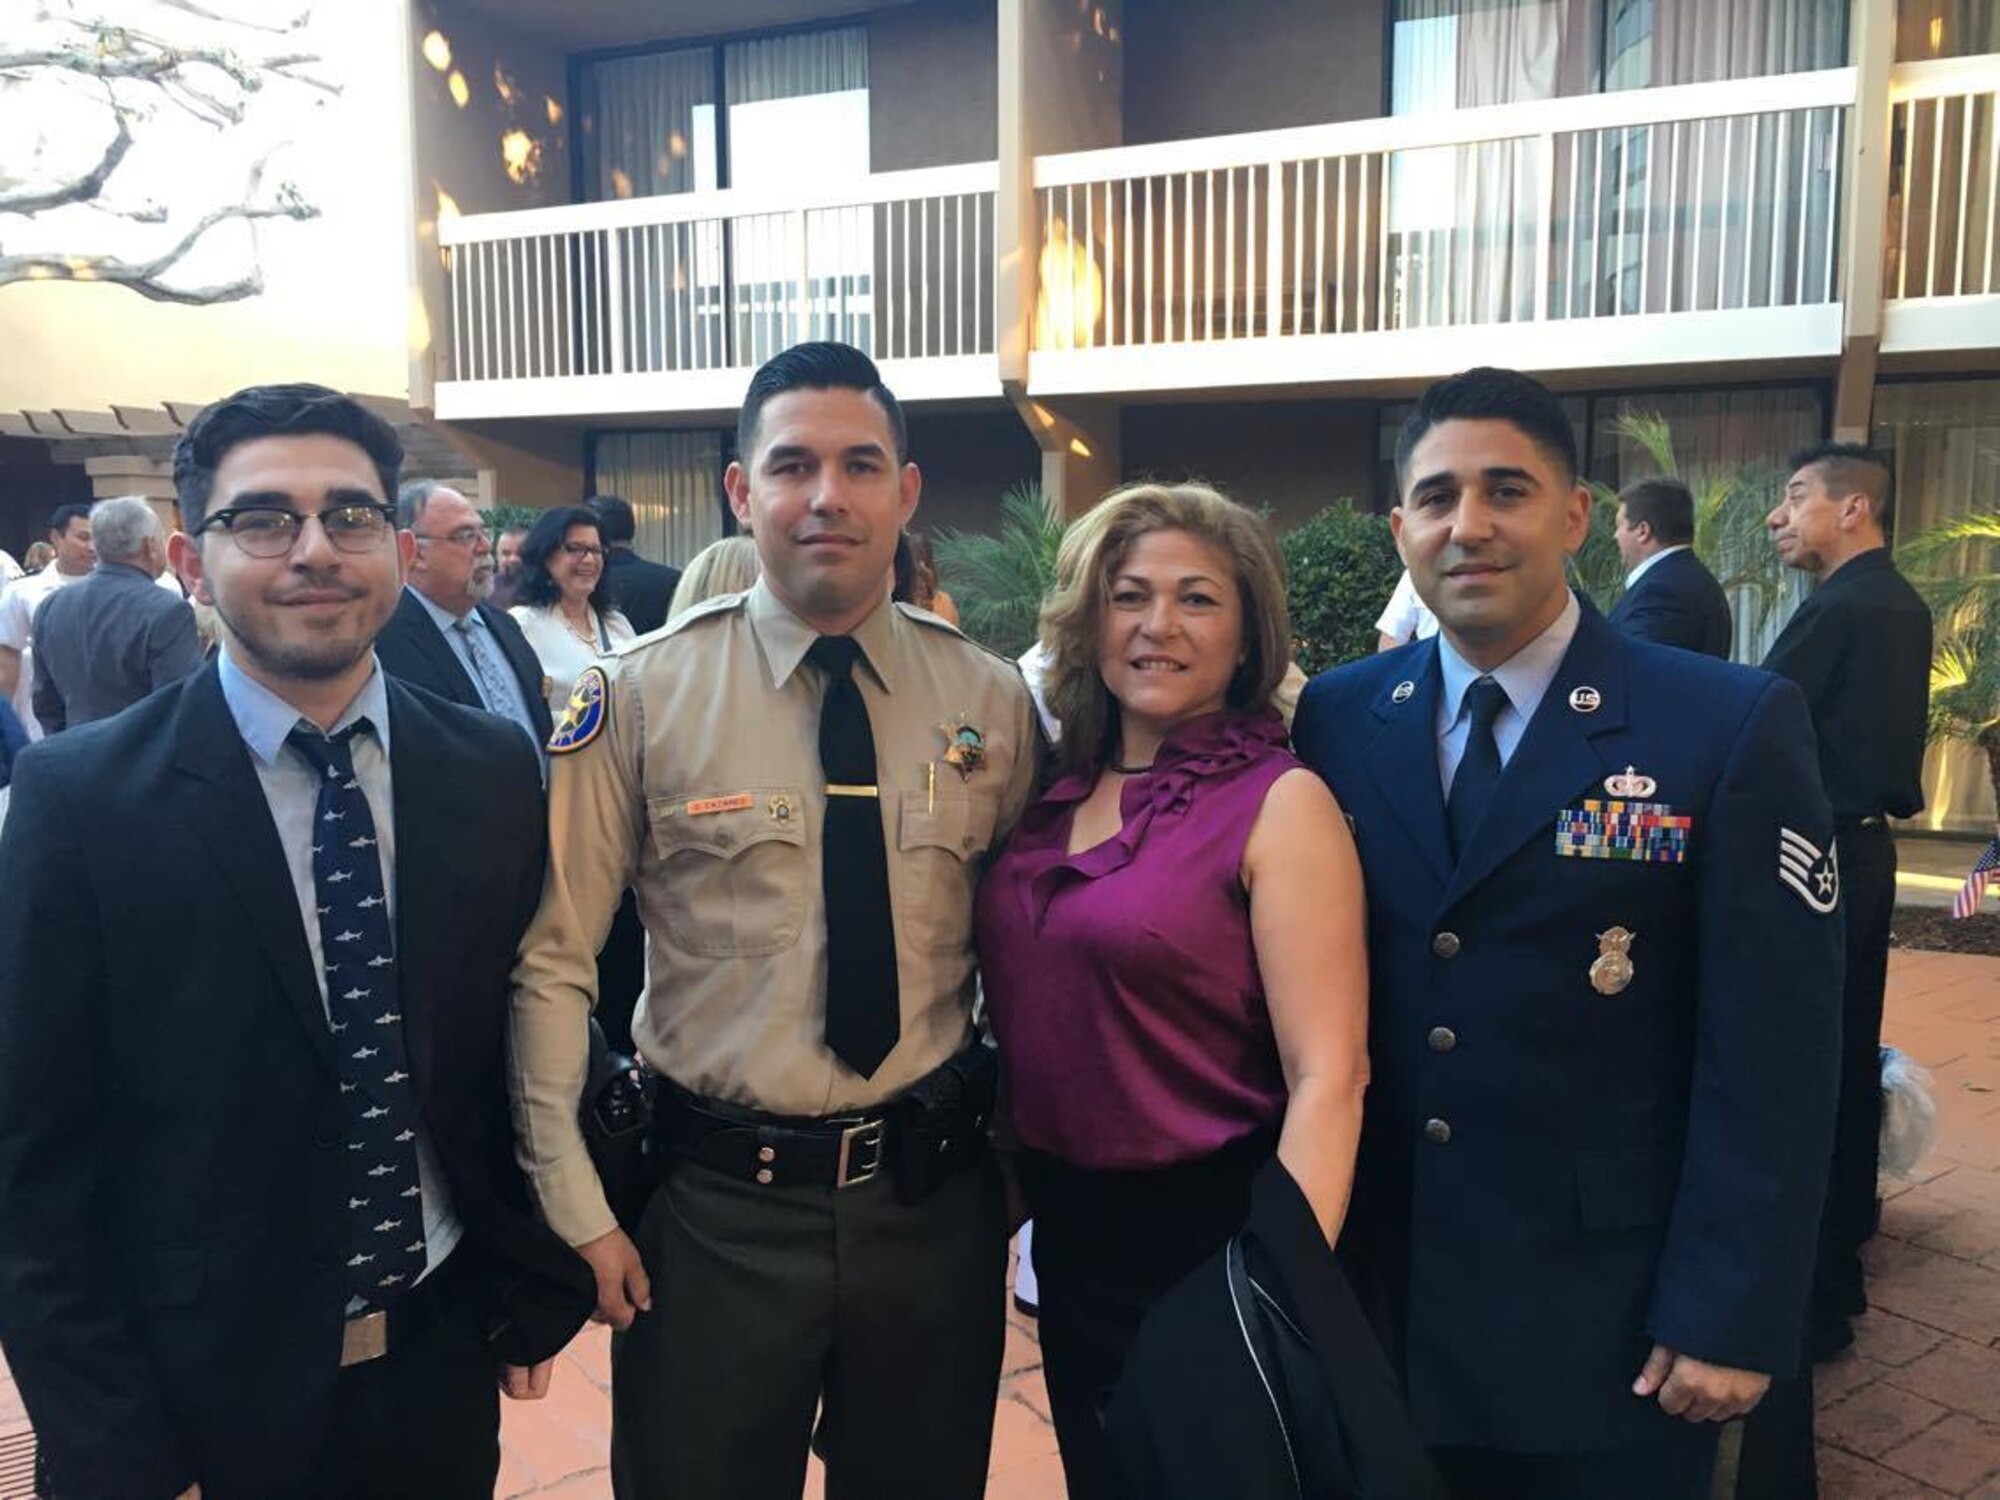 Staff Sgt. Jesus Cazares, 146th Airlift Wing unit training manager, and service members from other services were recognized at the Oxnard Chamber of Commerce Annual Military Appreciation Dinner, September 30. Cazares, who was born and raised in Oxnard shared this special moment with his mom, two brothers and fiancé. (Courtesy Photo)